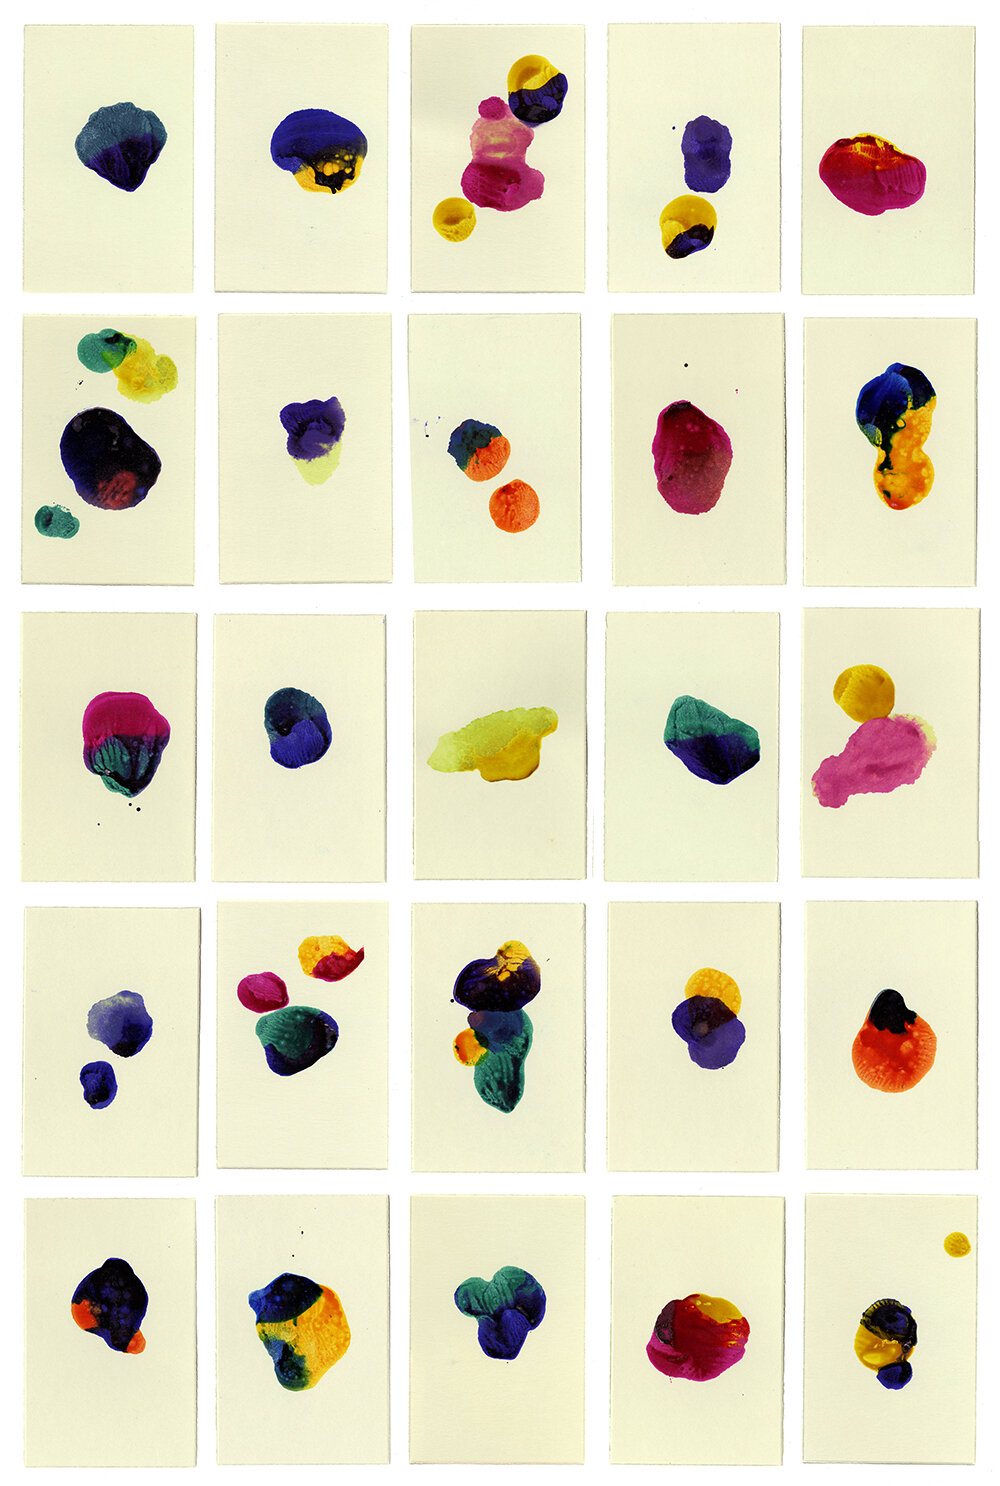   RUGS Stains  Unique ink blots for RUGS book. A collaboration with Denise Schatz of Miniature Garden, 2013   